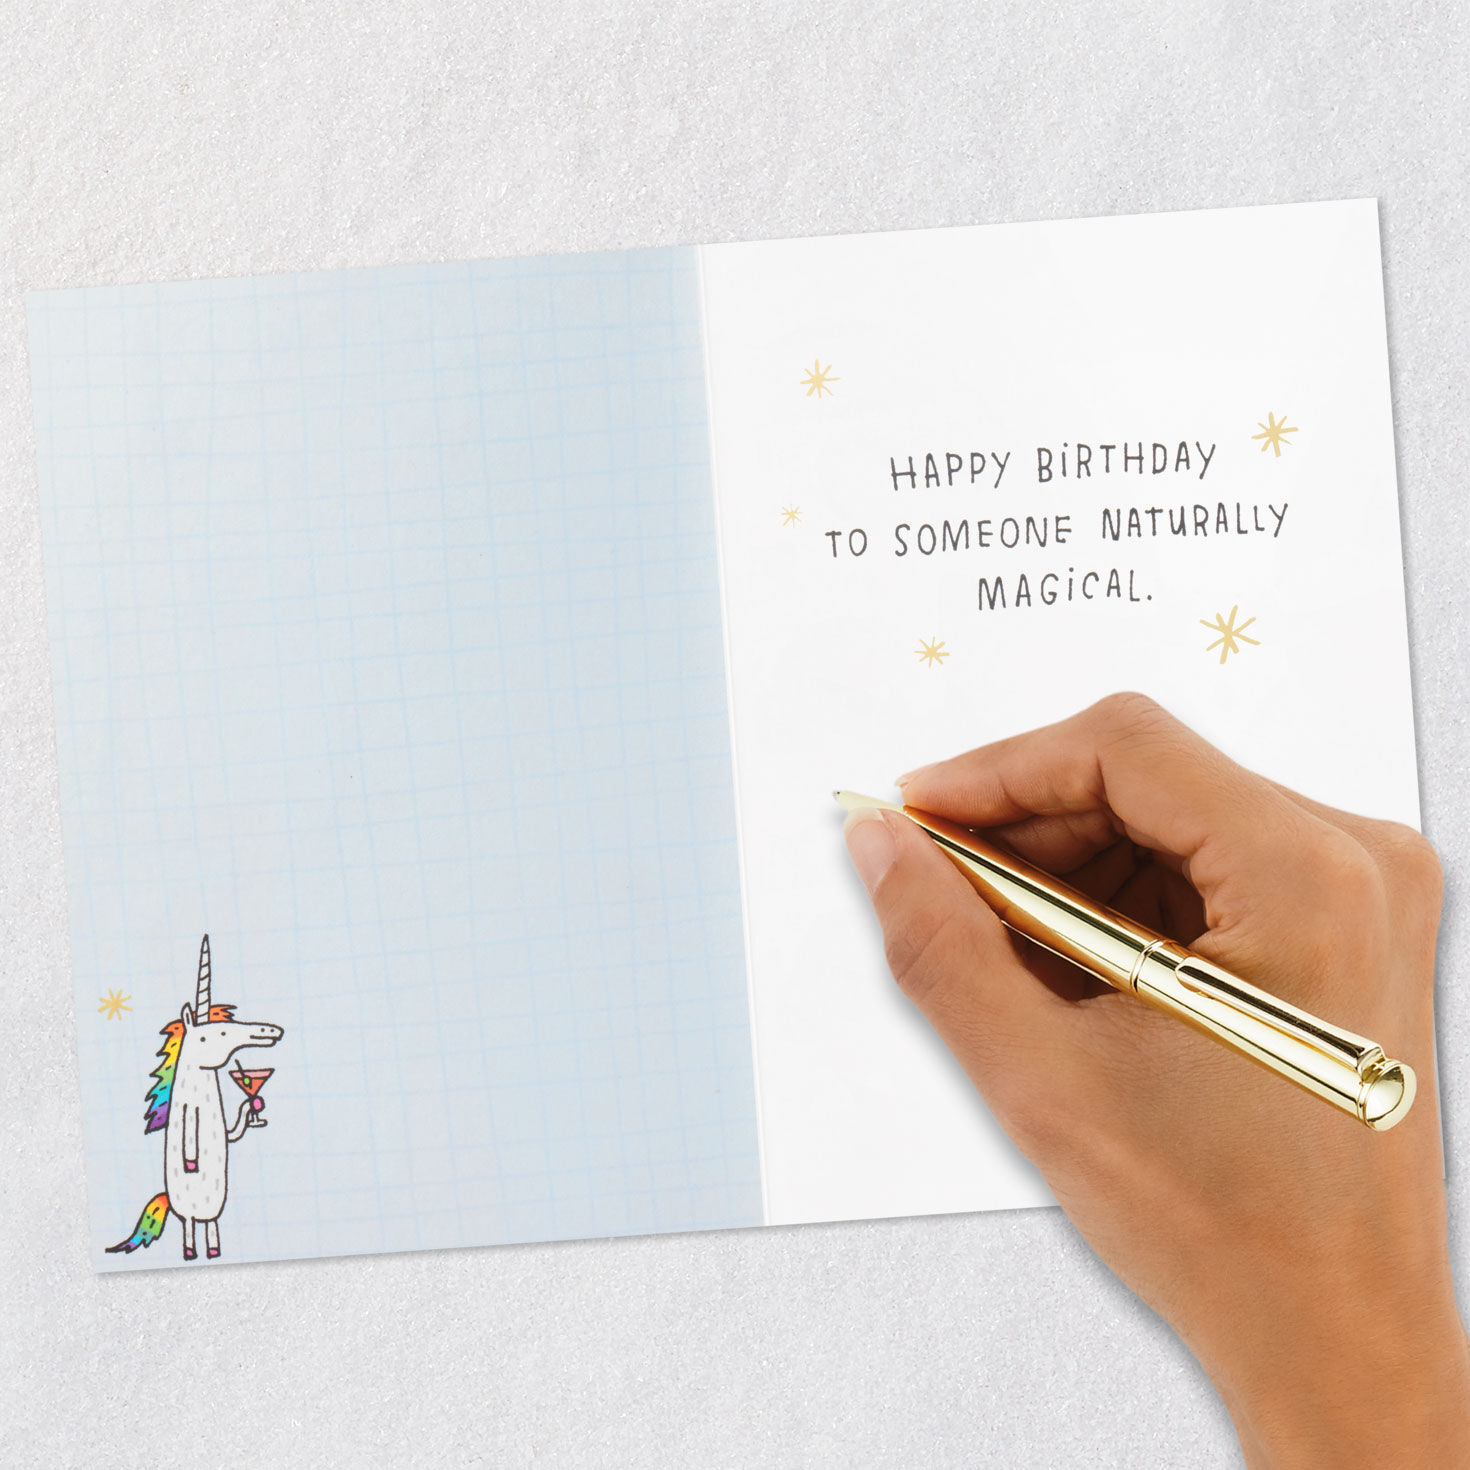 You're Naturally Magical Funny Birthday Card for only USD 3.99 | Hallmark